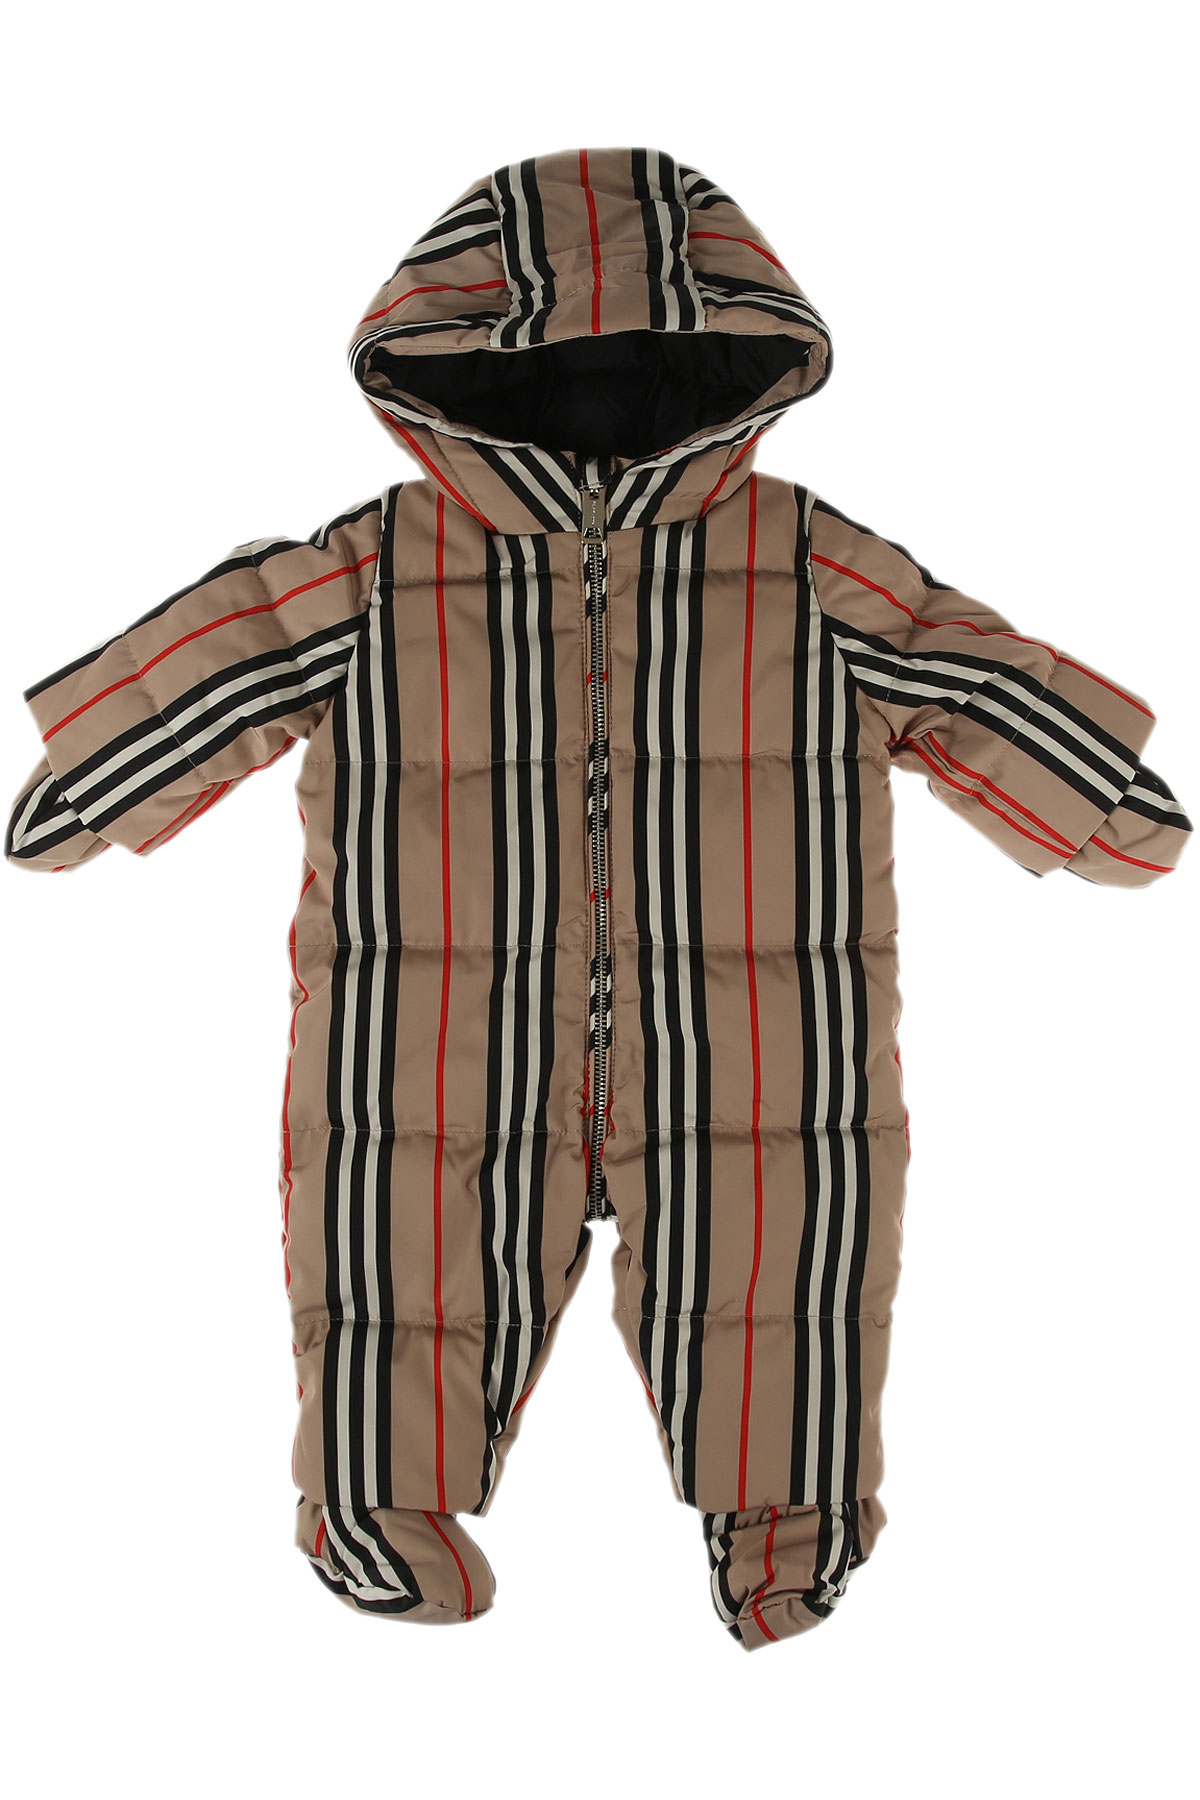 Baby Boy Clothing Burberry, Style code: 8041219-a7029-